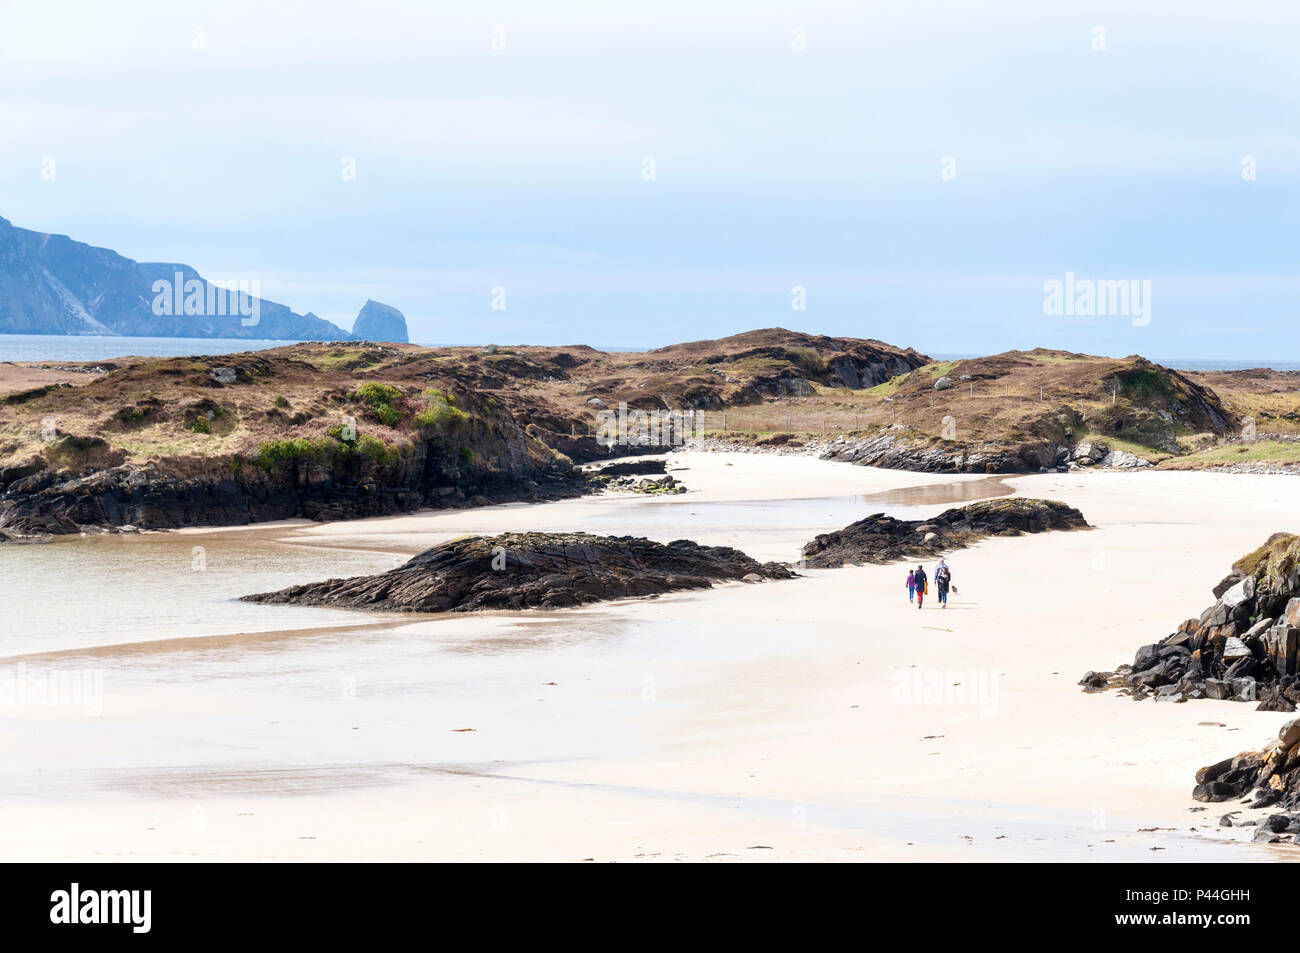 Familie Wandern am Strand bei Rosbeg, County Donegal, Irland Stockfoto